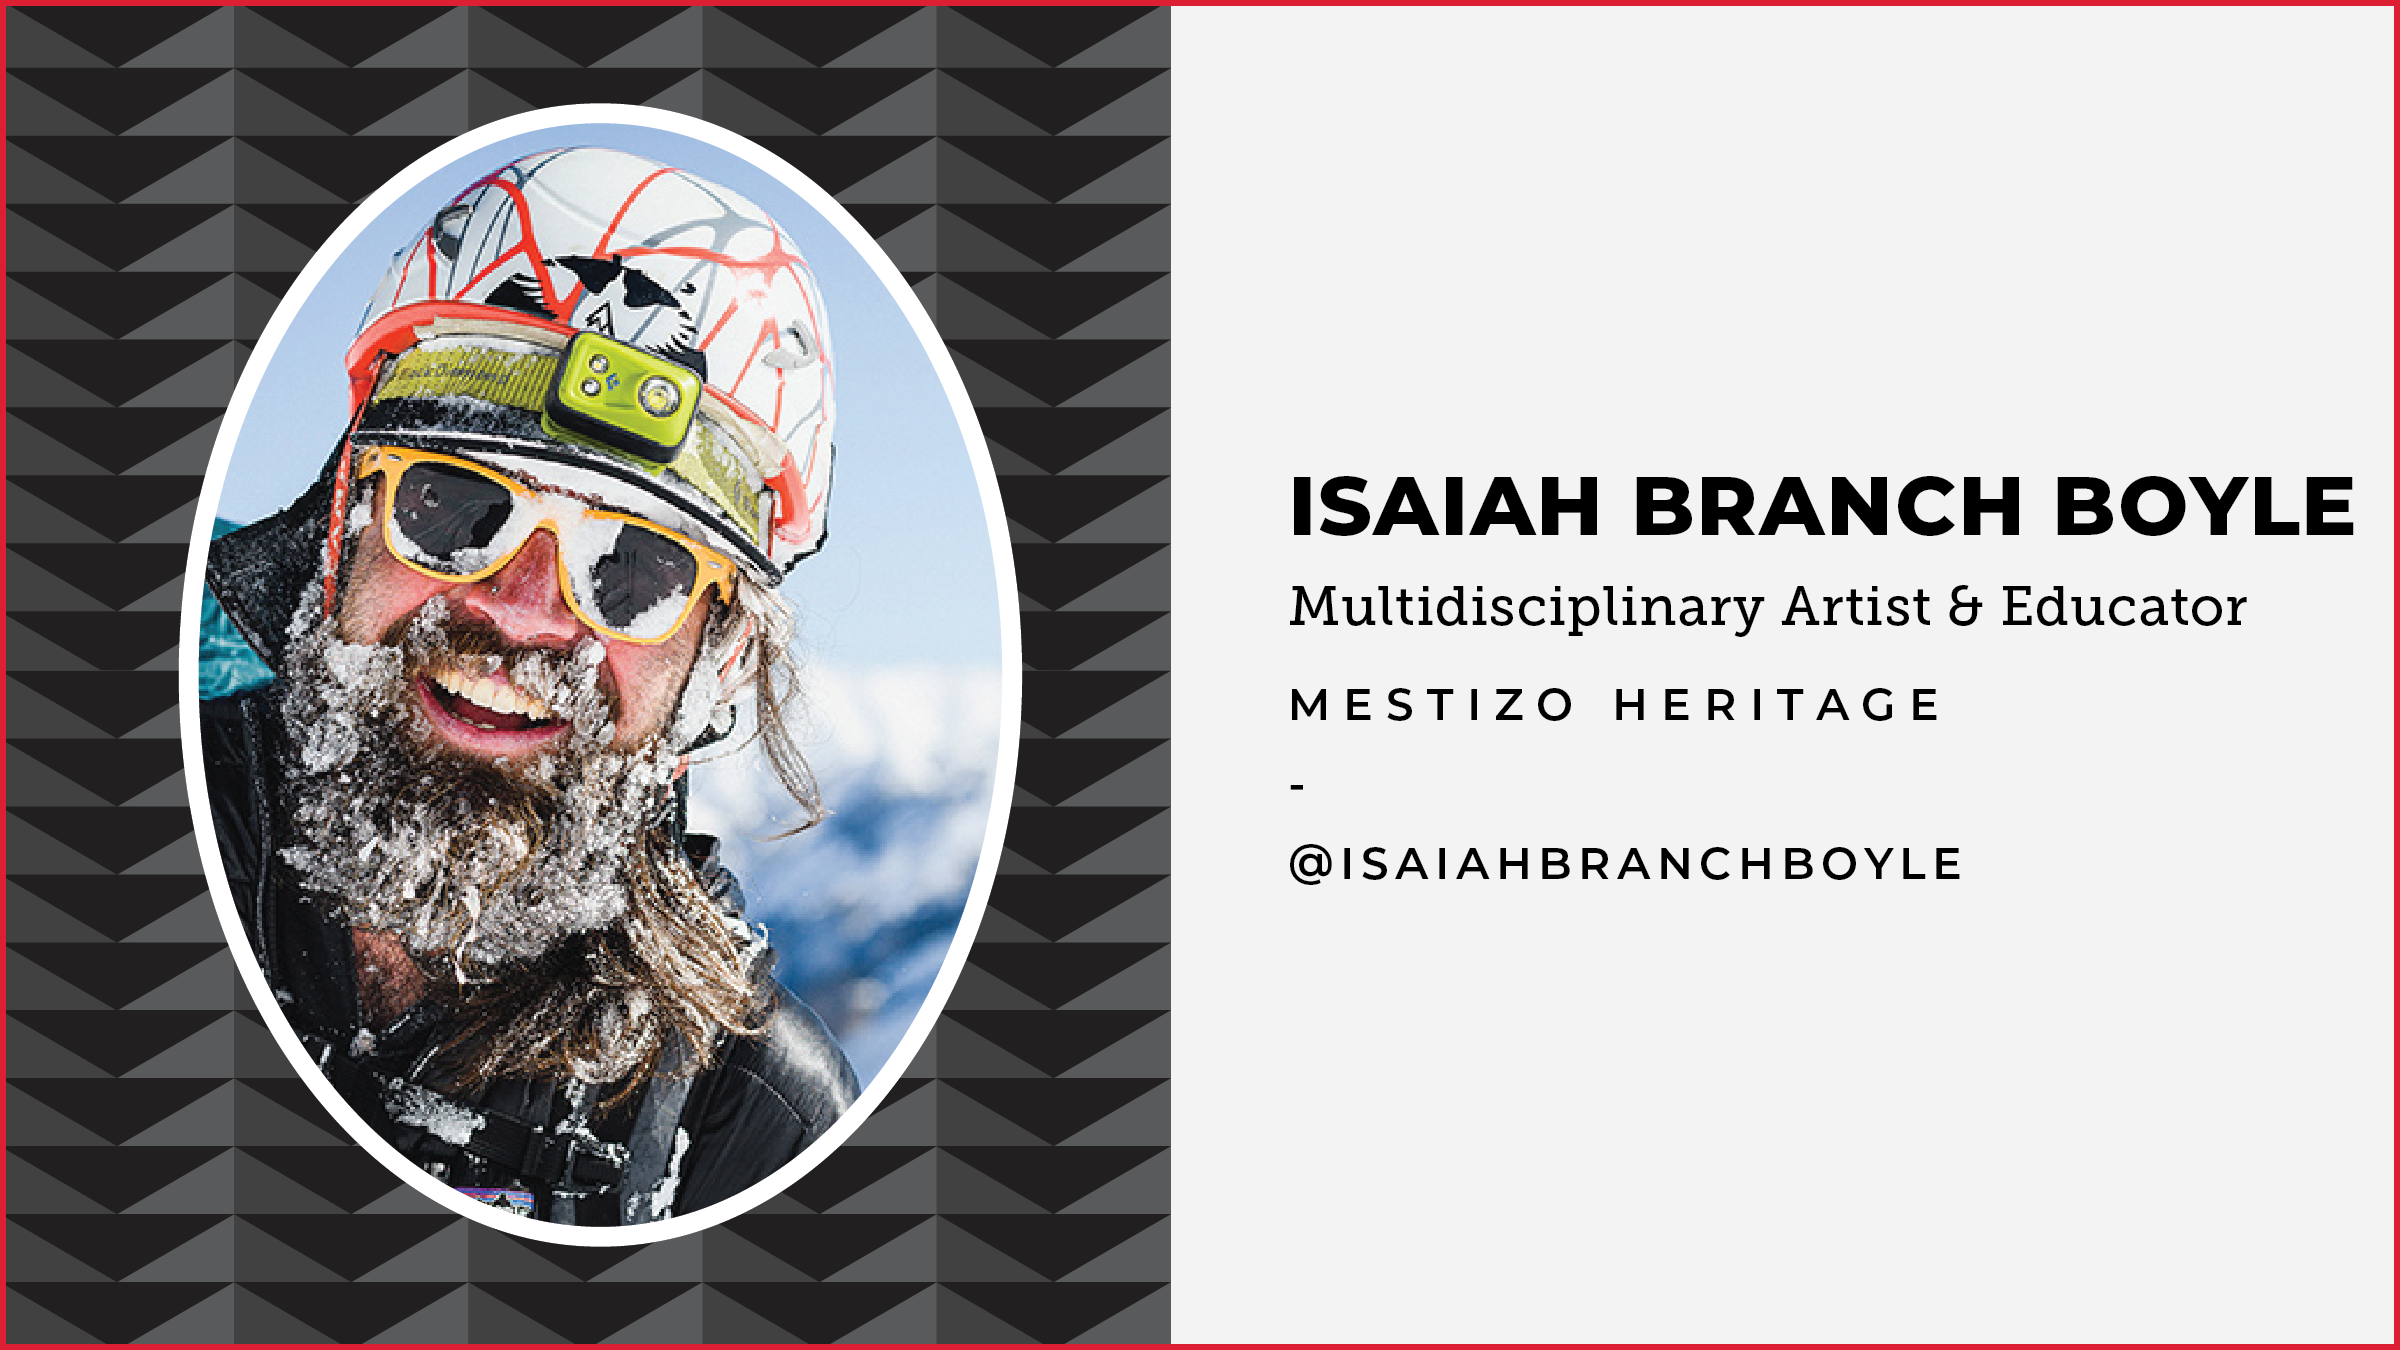 Artist biography for Isaiah Branch Boyle at Native Outdoors in connection with Winter Park Resort